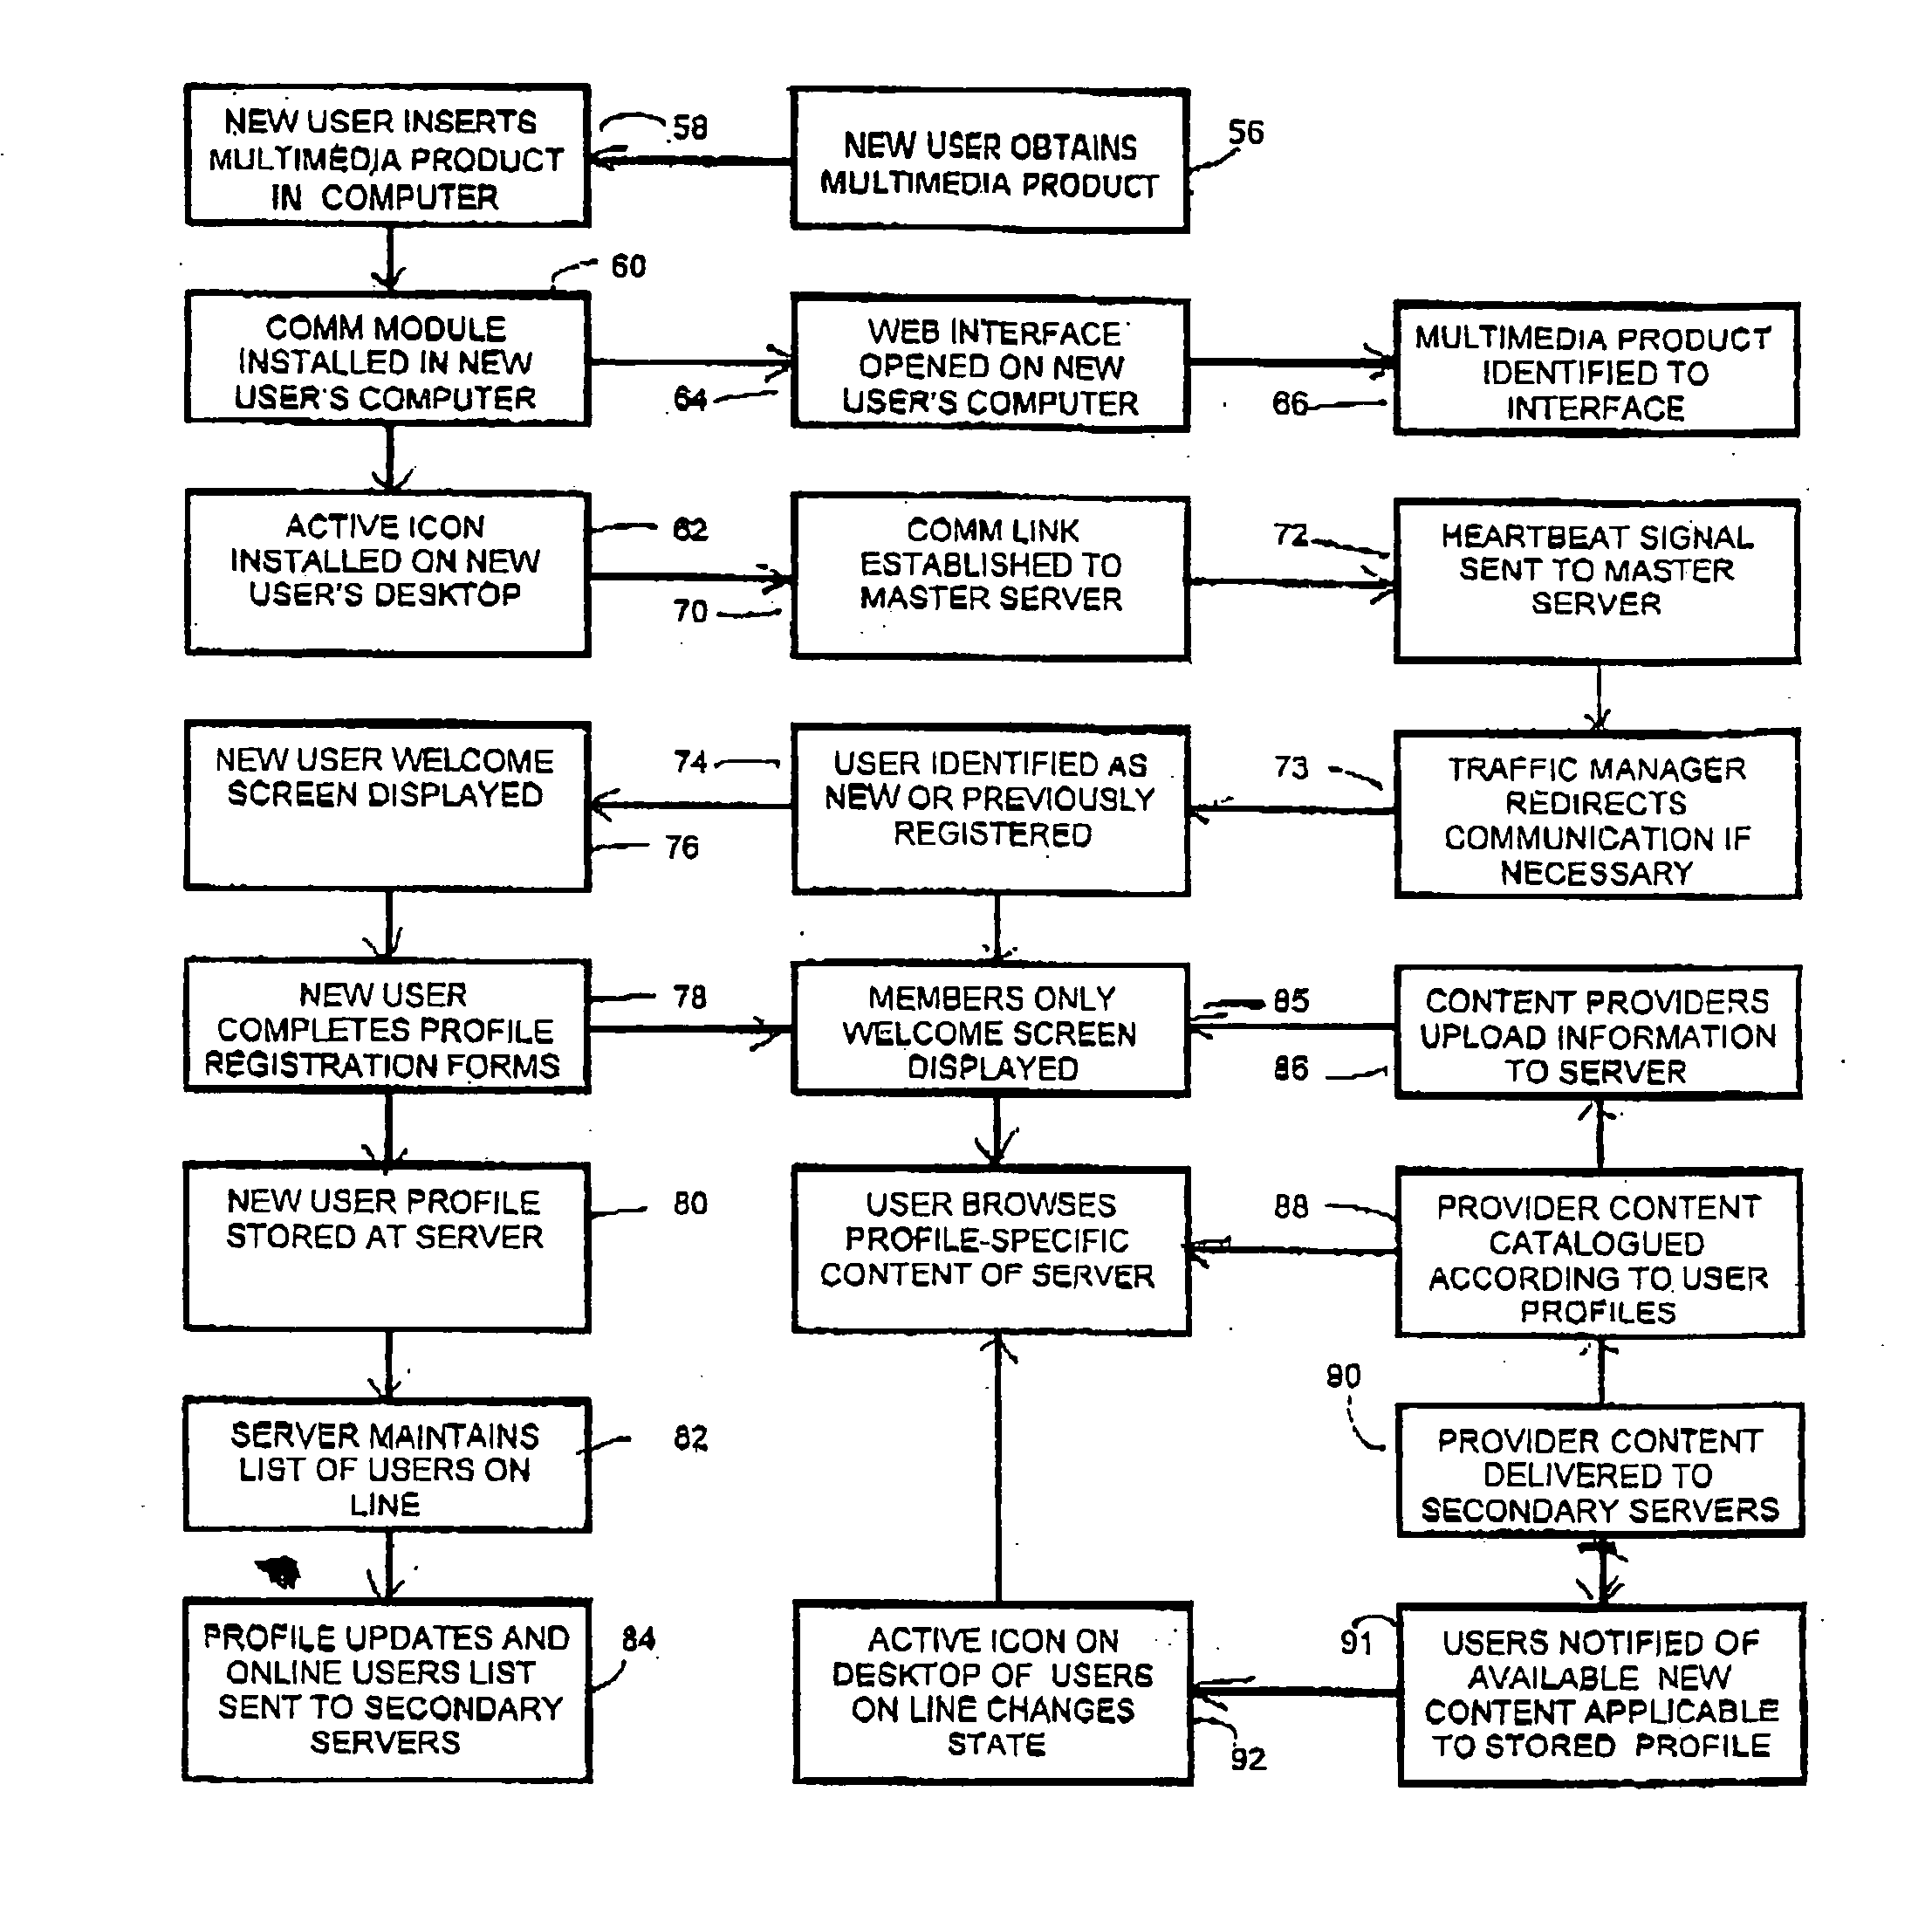 System and method for disseminating information over a communication network according to predefined consumer profiles